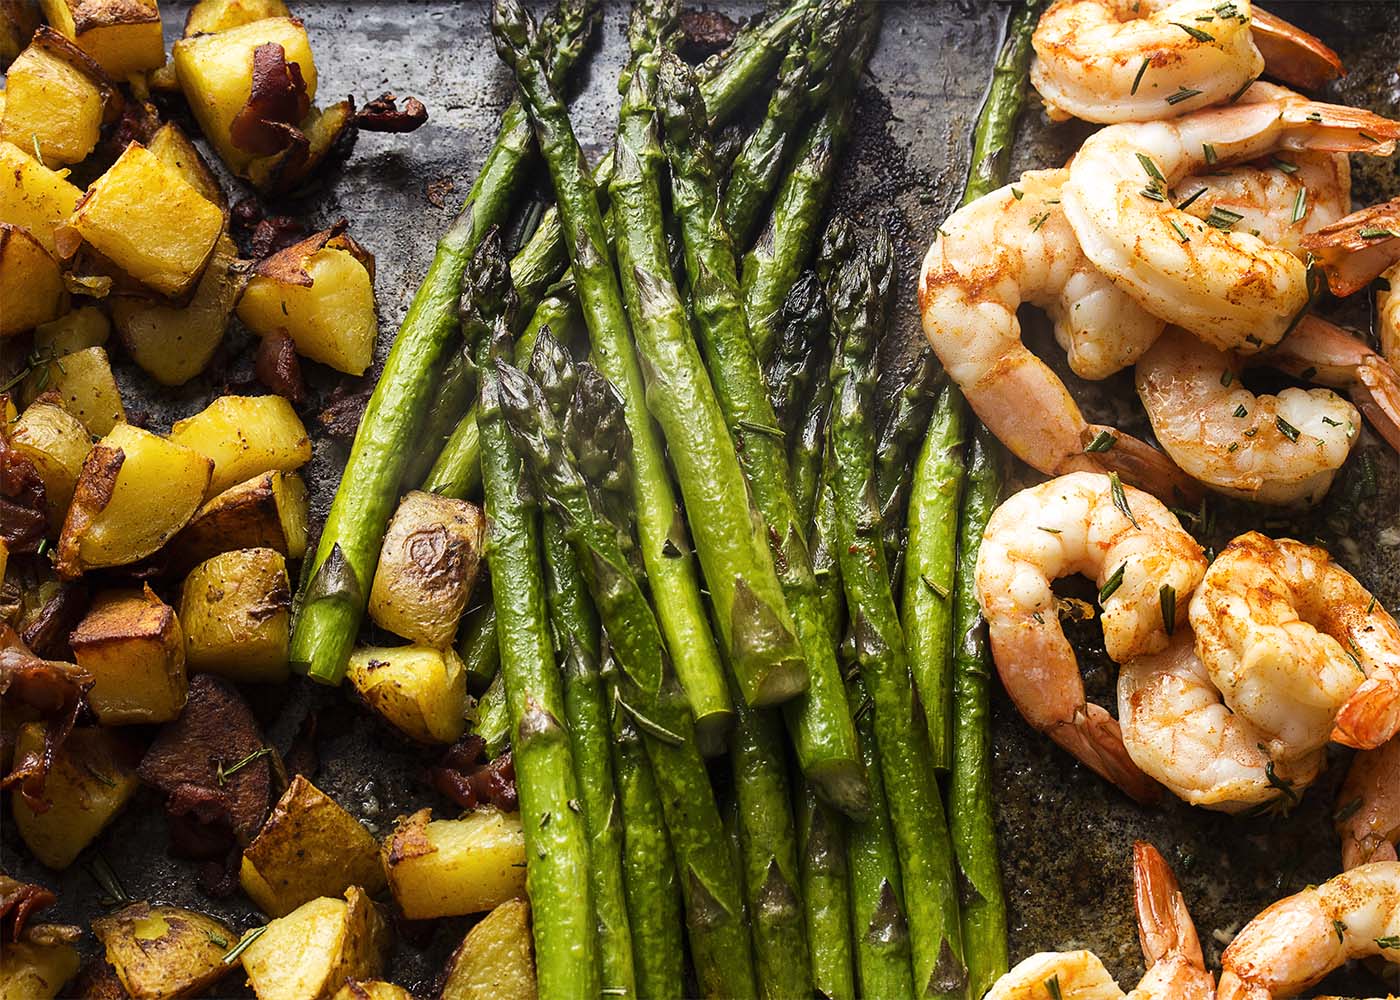 Healthy and easy! This roasted shrimp, asparagus, and potato sheet pan dinner will have food on the table in no time, but without a pile of pots to wash. | justalittlebitofbacon.com